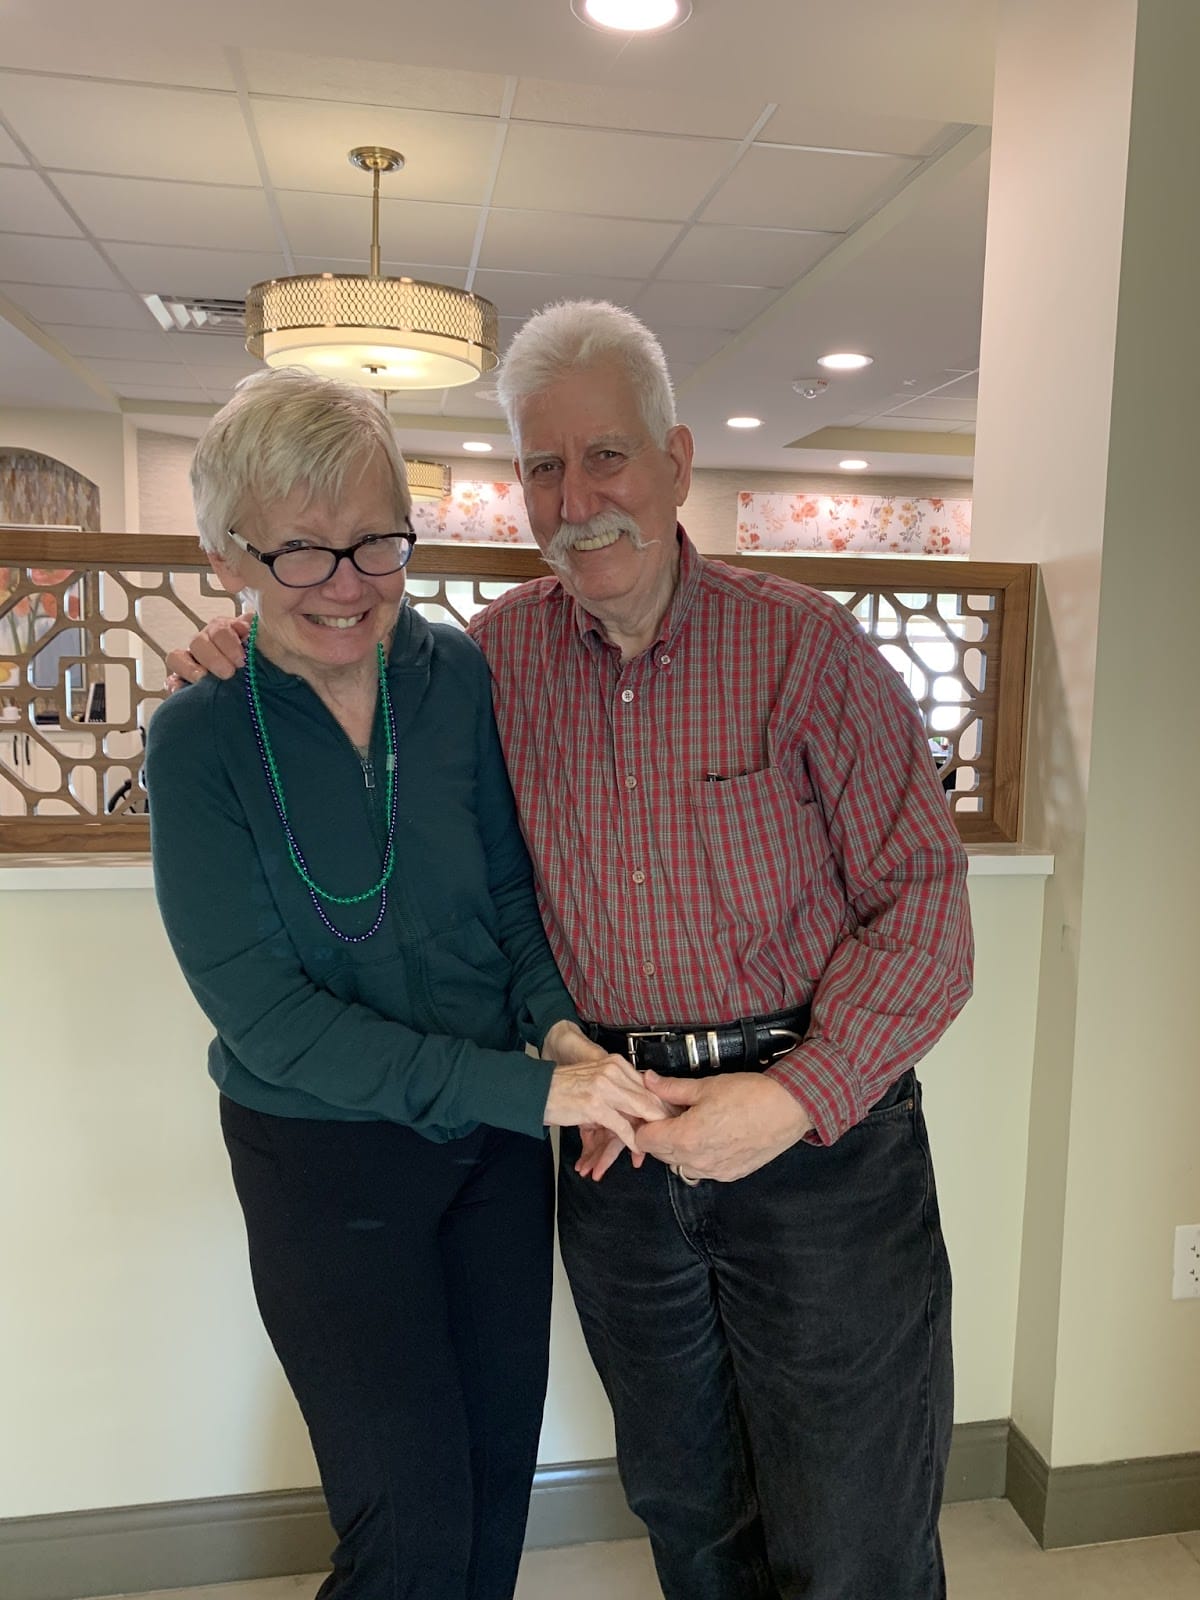 A couple standing in an assisted living facility and smiling